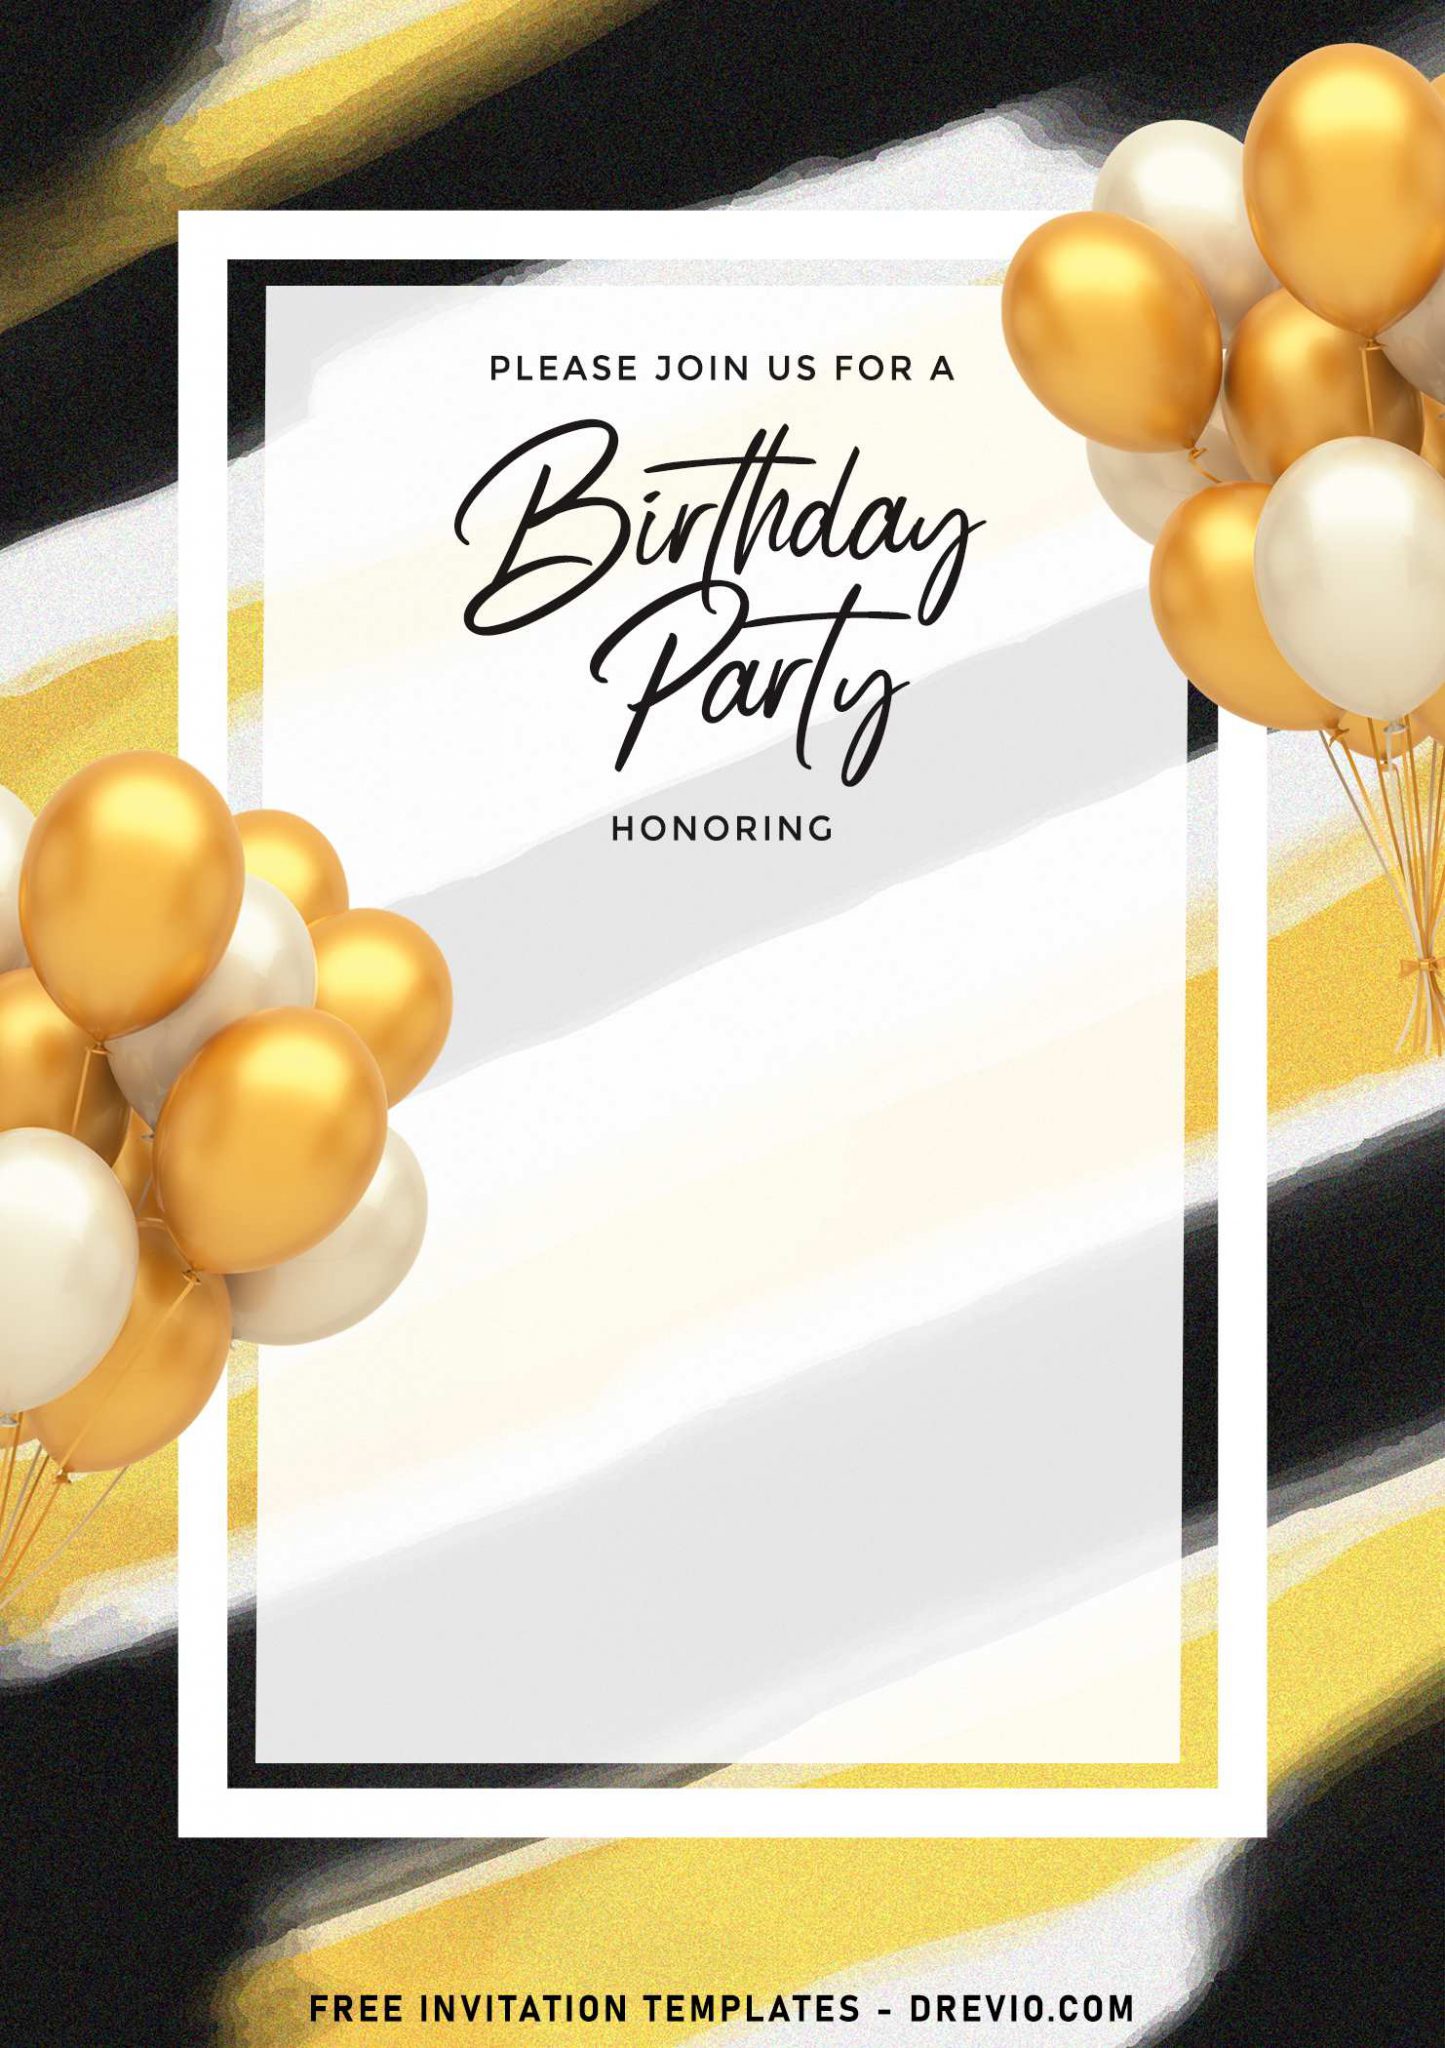 templates-for-party-invitations